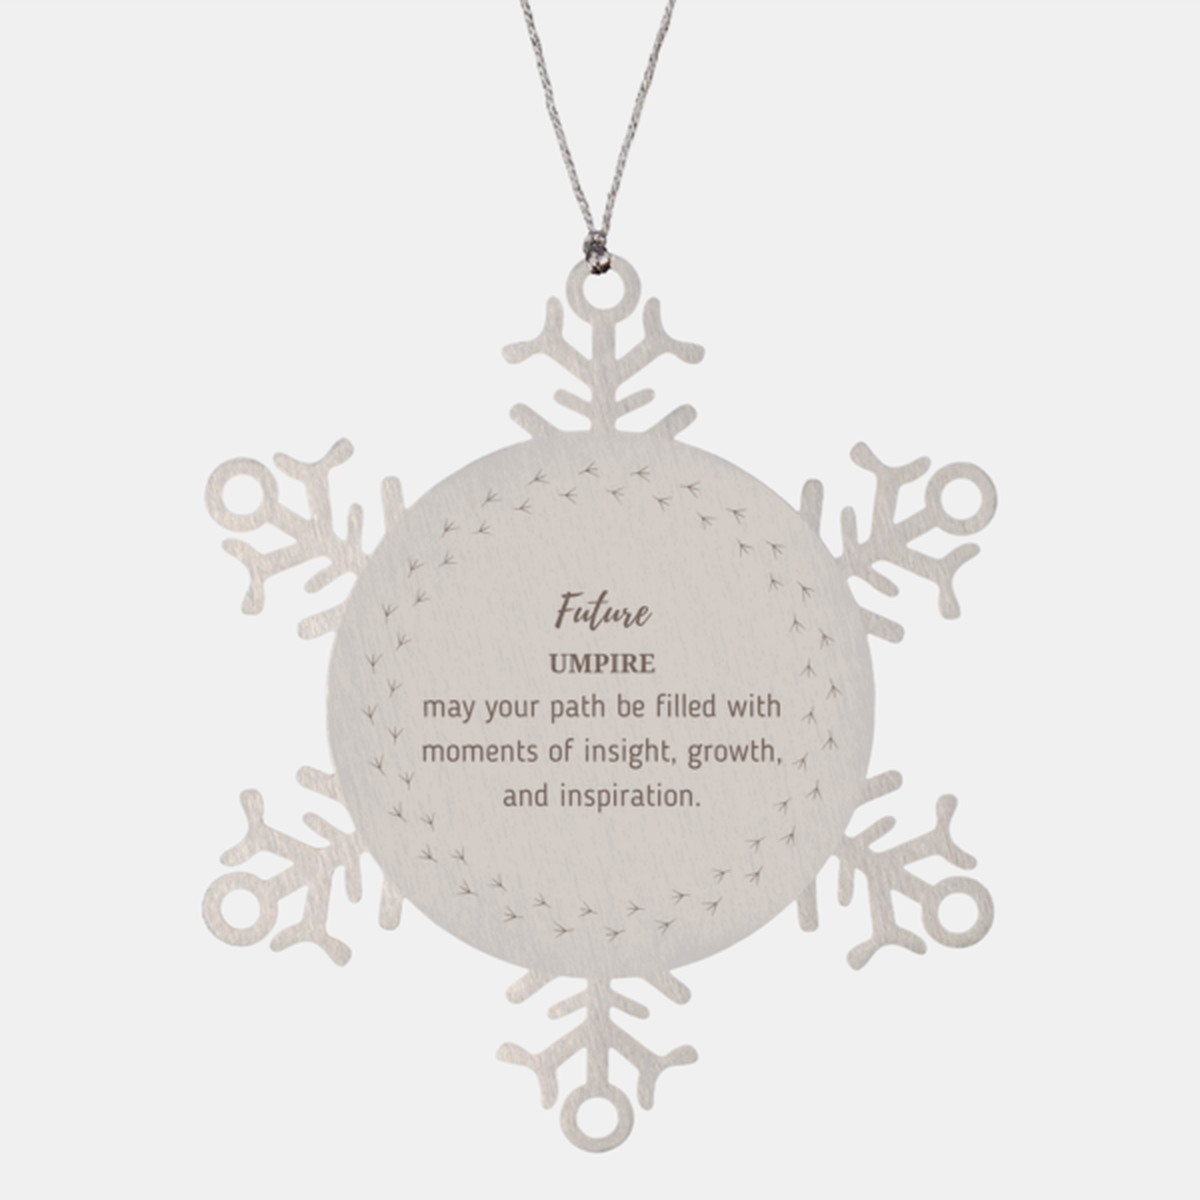 Future Umpire Gifts, May your path be filled with moments of insight, Graduation Gifts for New Umpire, Christmas Unique Snowflake Ornament For Men, Women, Friends